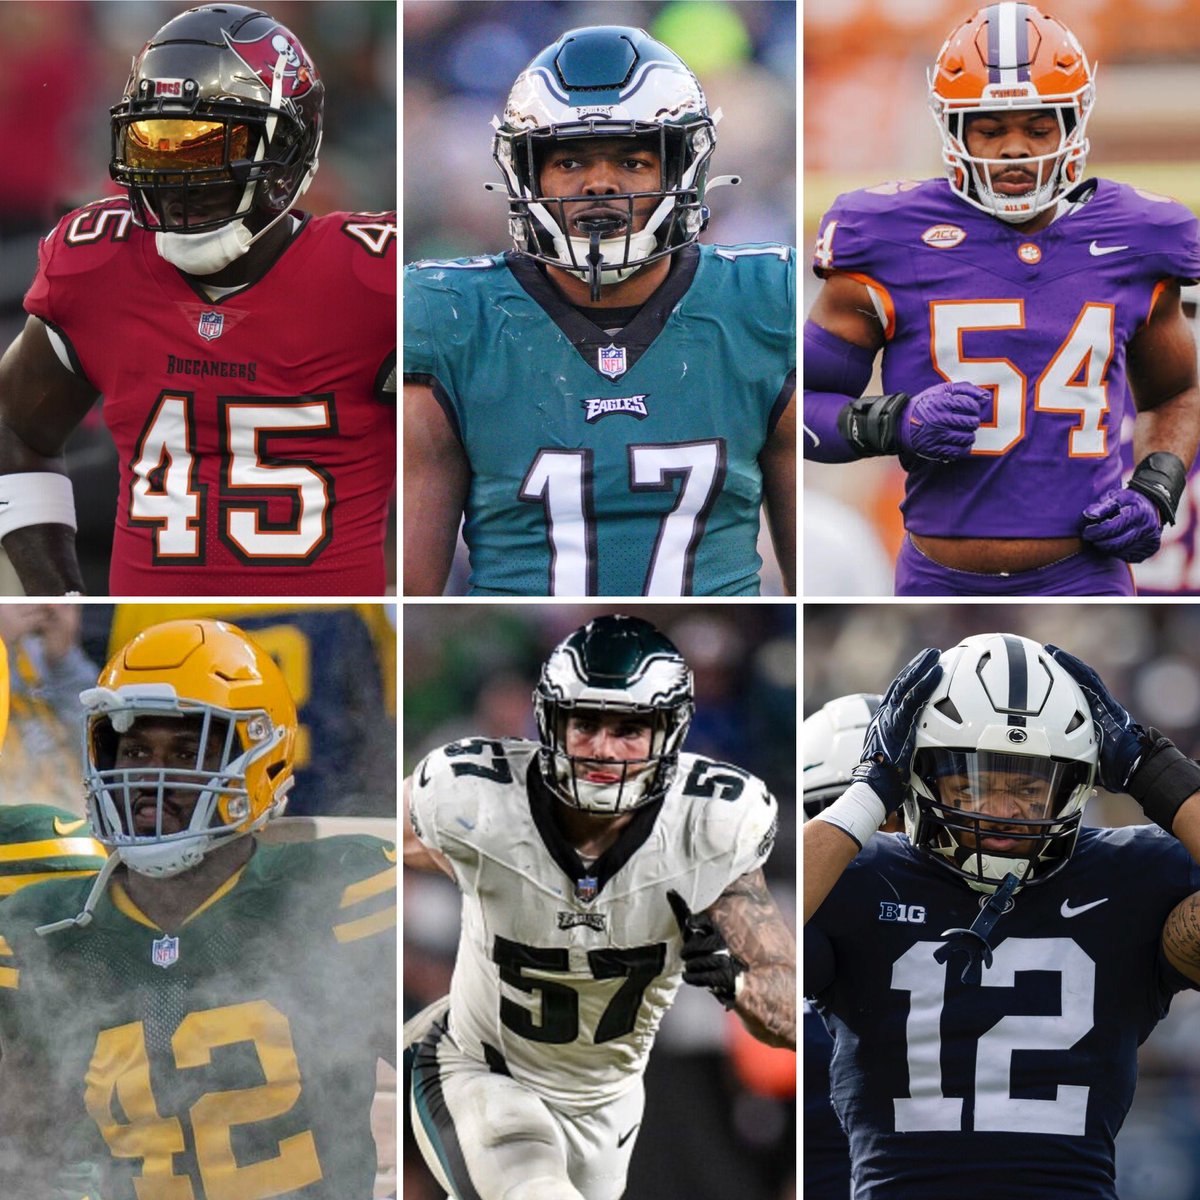 The Linebacker Postion is one to watch this year. How will this group look in 24? - Devin White - Nakobe Dean - Jeremiah Trotter Jr - Oren Burks - Ben VanSumeren - Brandon Smith #FlyEaglesFly